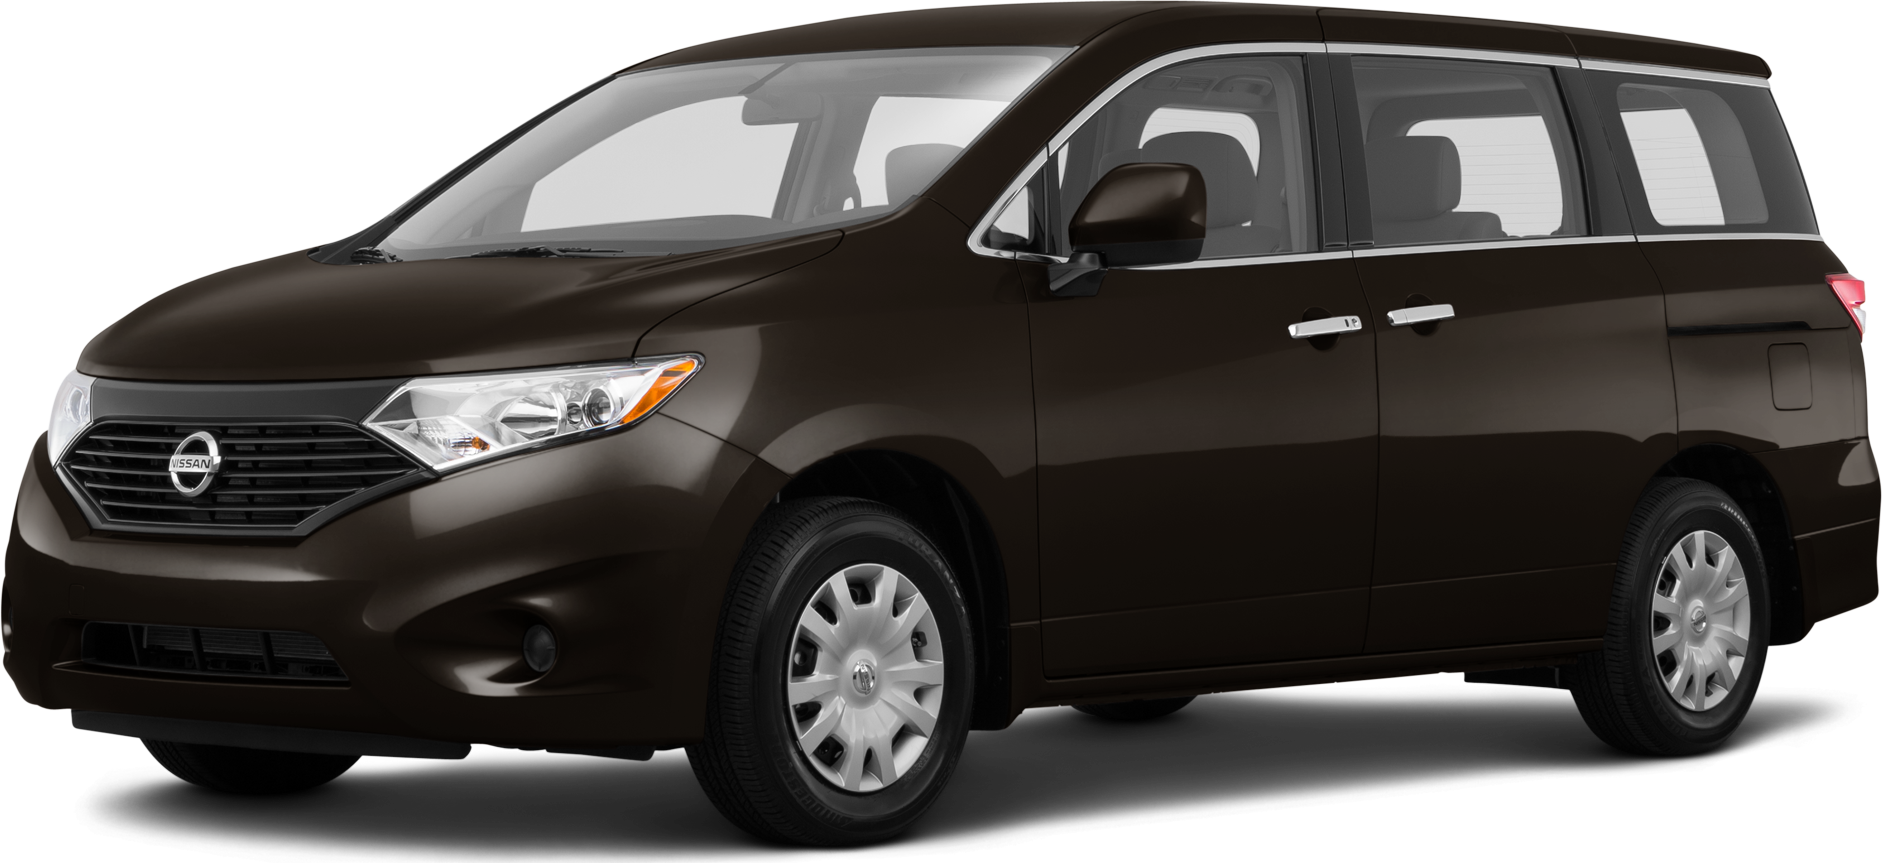 2016 Nissan Quest Price, Value, Ratings & Reviews Kelley Blue Book